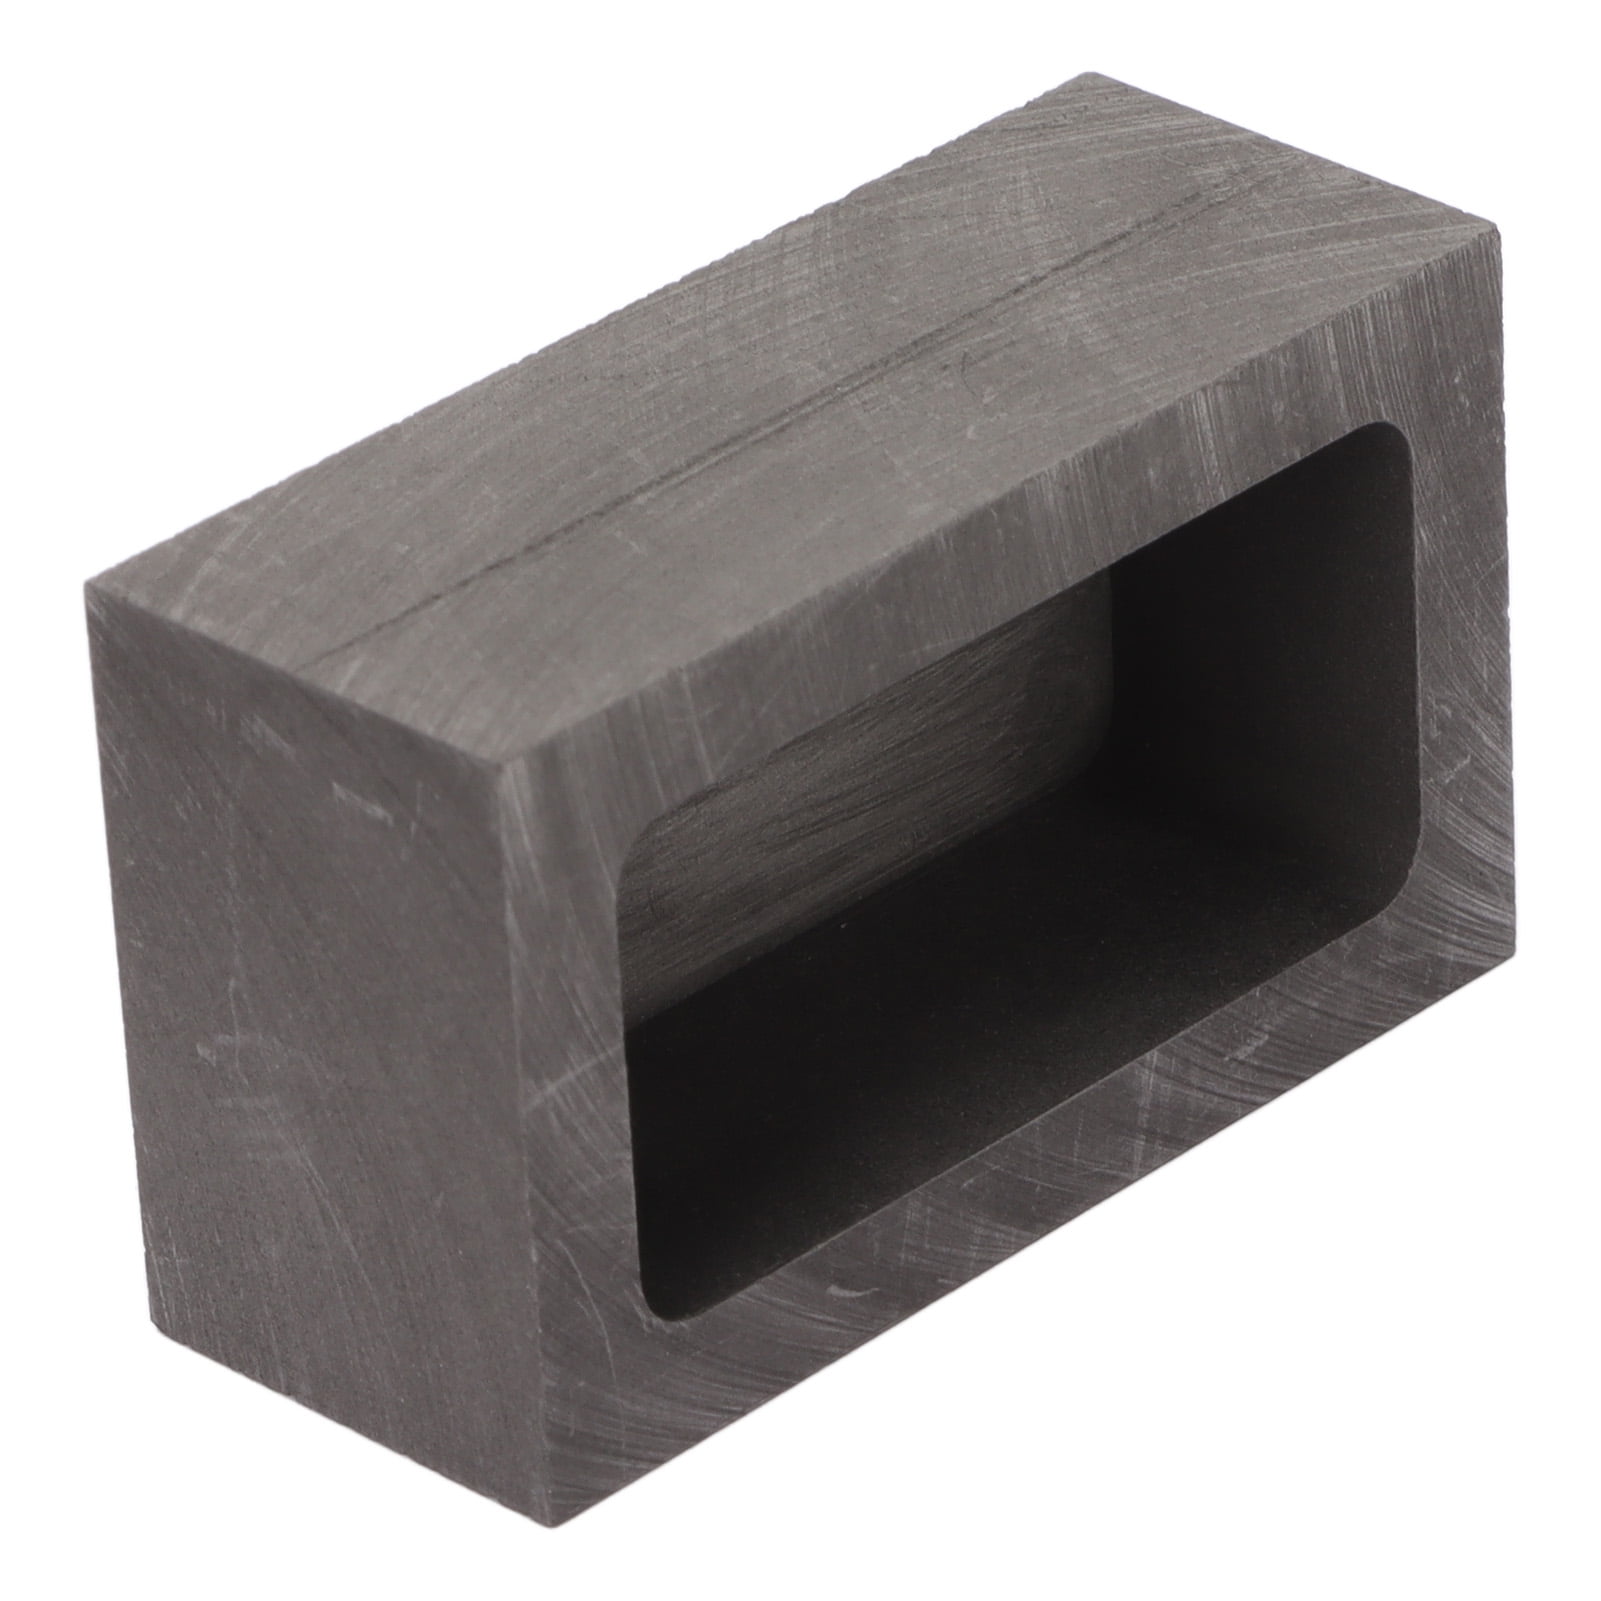 Metal bar in graphite mold stock image. Image of investment